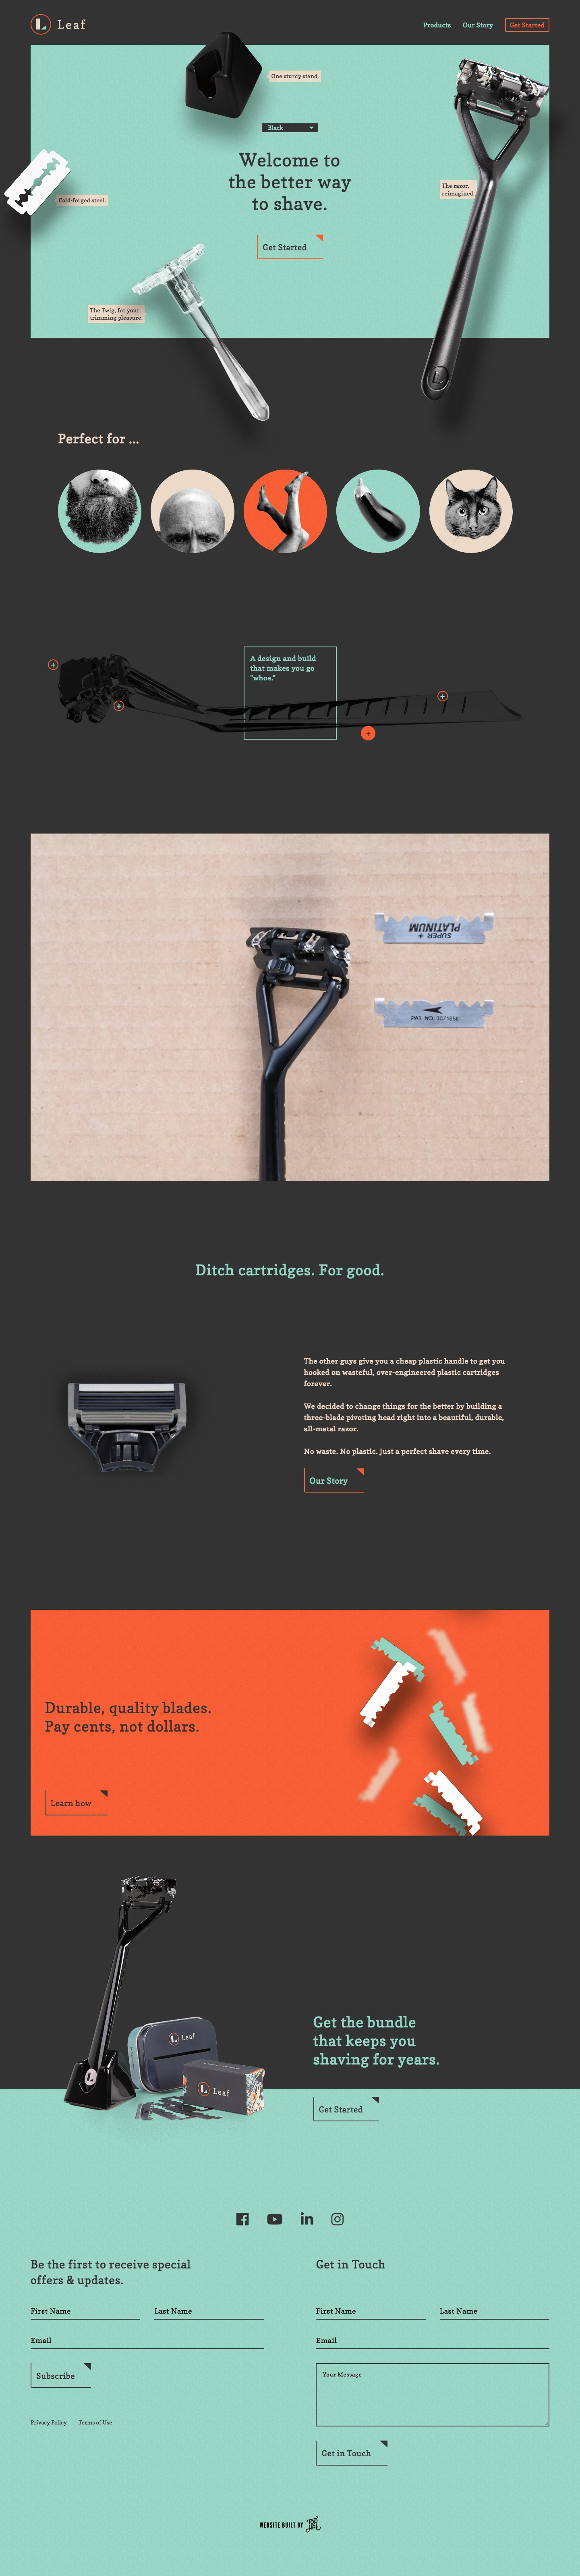 Leaf Shave Landing Page Example: Welcome to the better way to shave